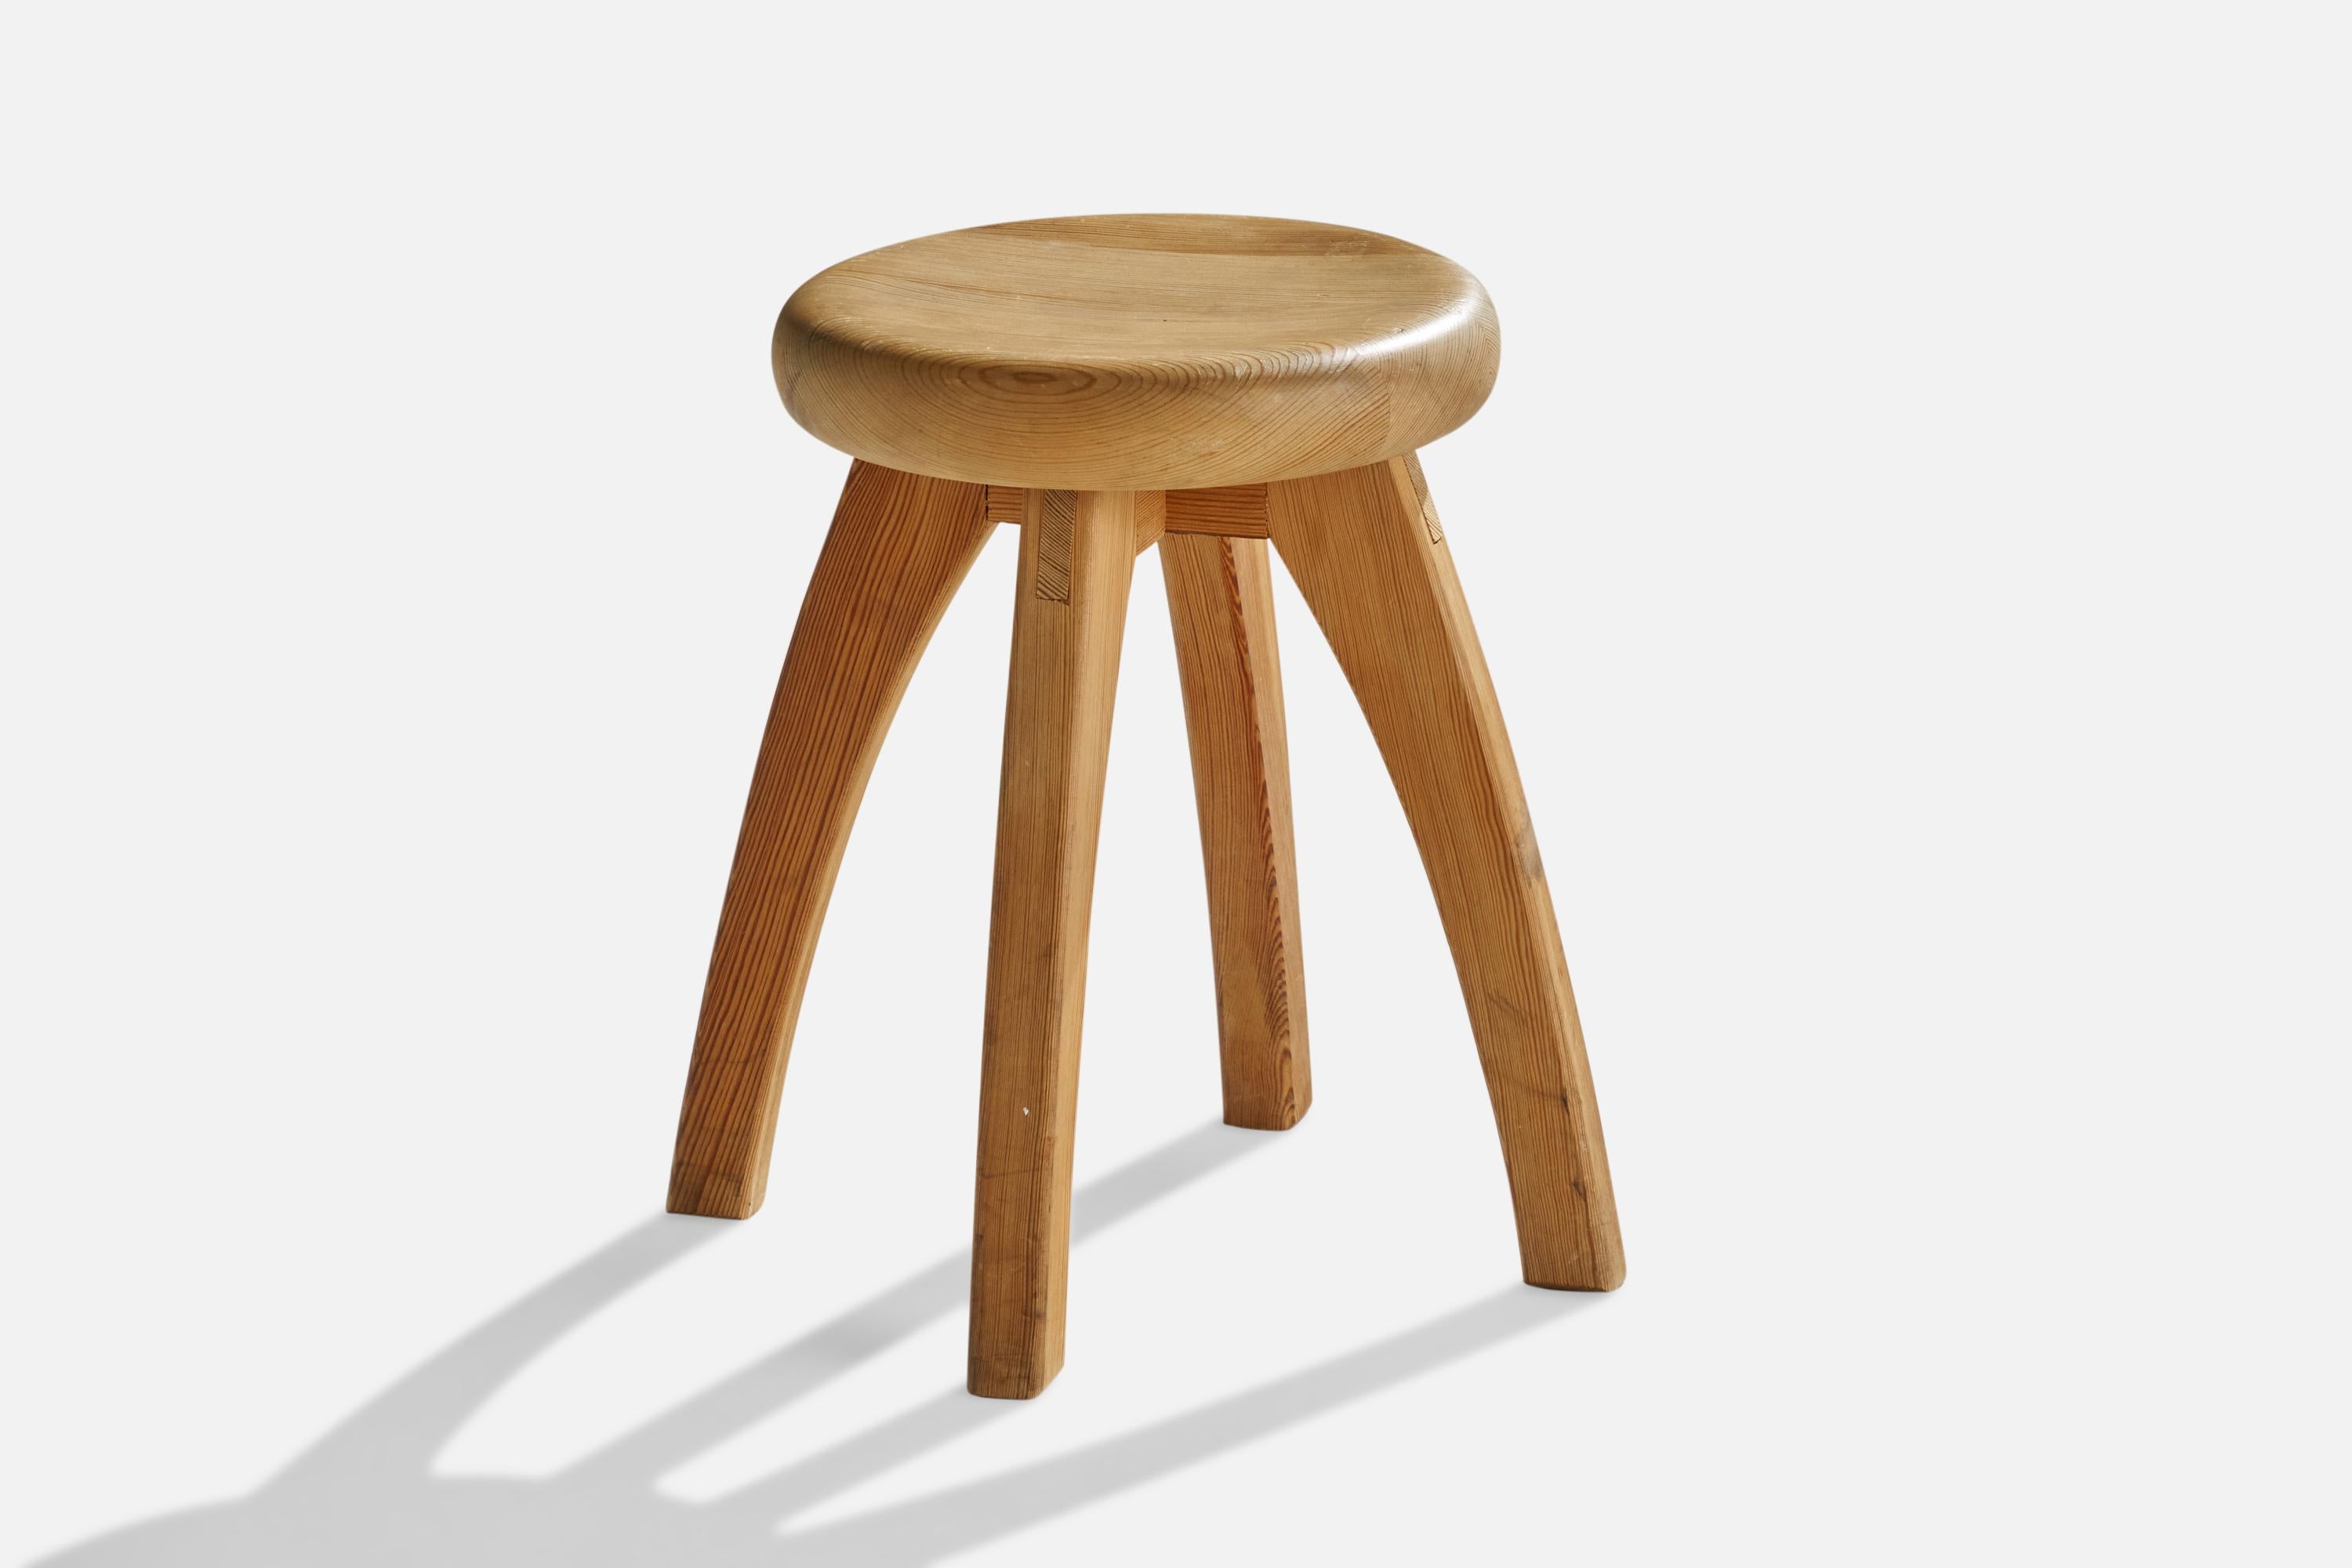 A pine stool designed and produced in Sweden, c. 1970s.

seat height: 15